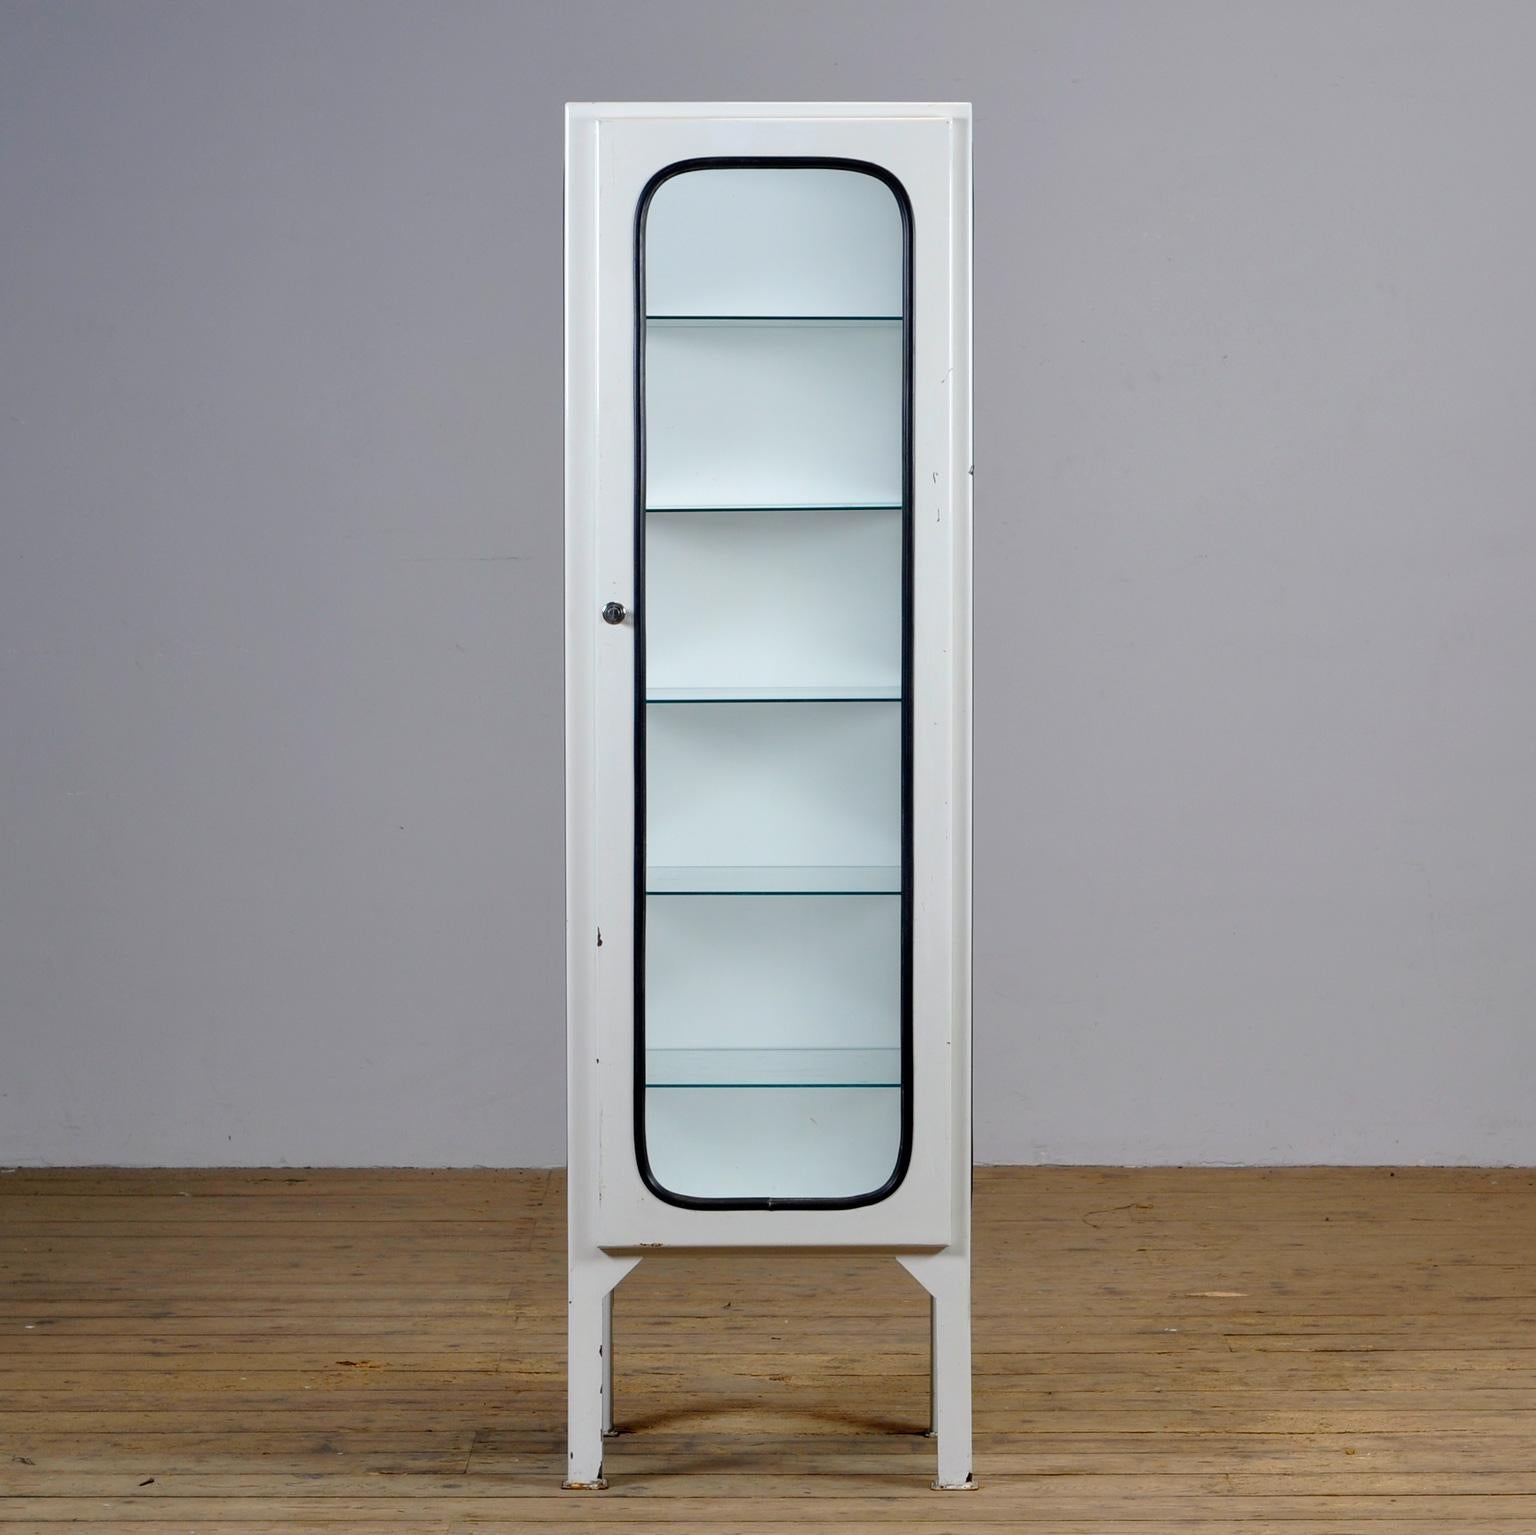 This medical cabinet was designed in the 1970s and was produced circa 1975 in Hungary. It is made from iron and glass with new glass shelves. The glass is held by a black rubber strip. The cabinet features five adjustable glass shelves and a